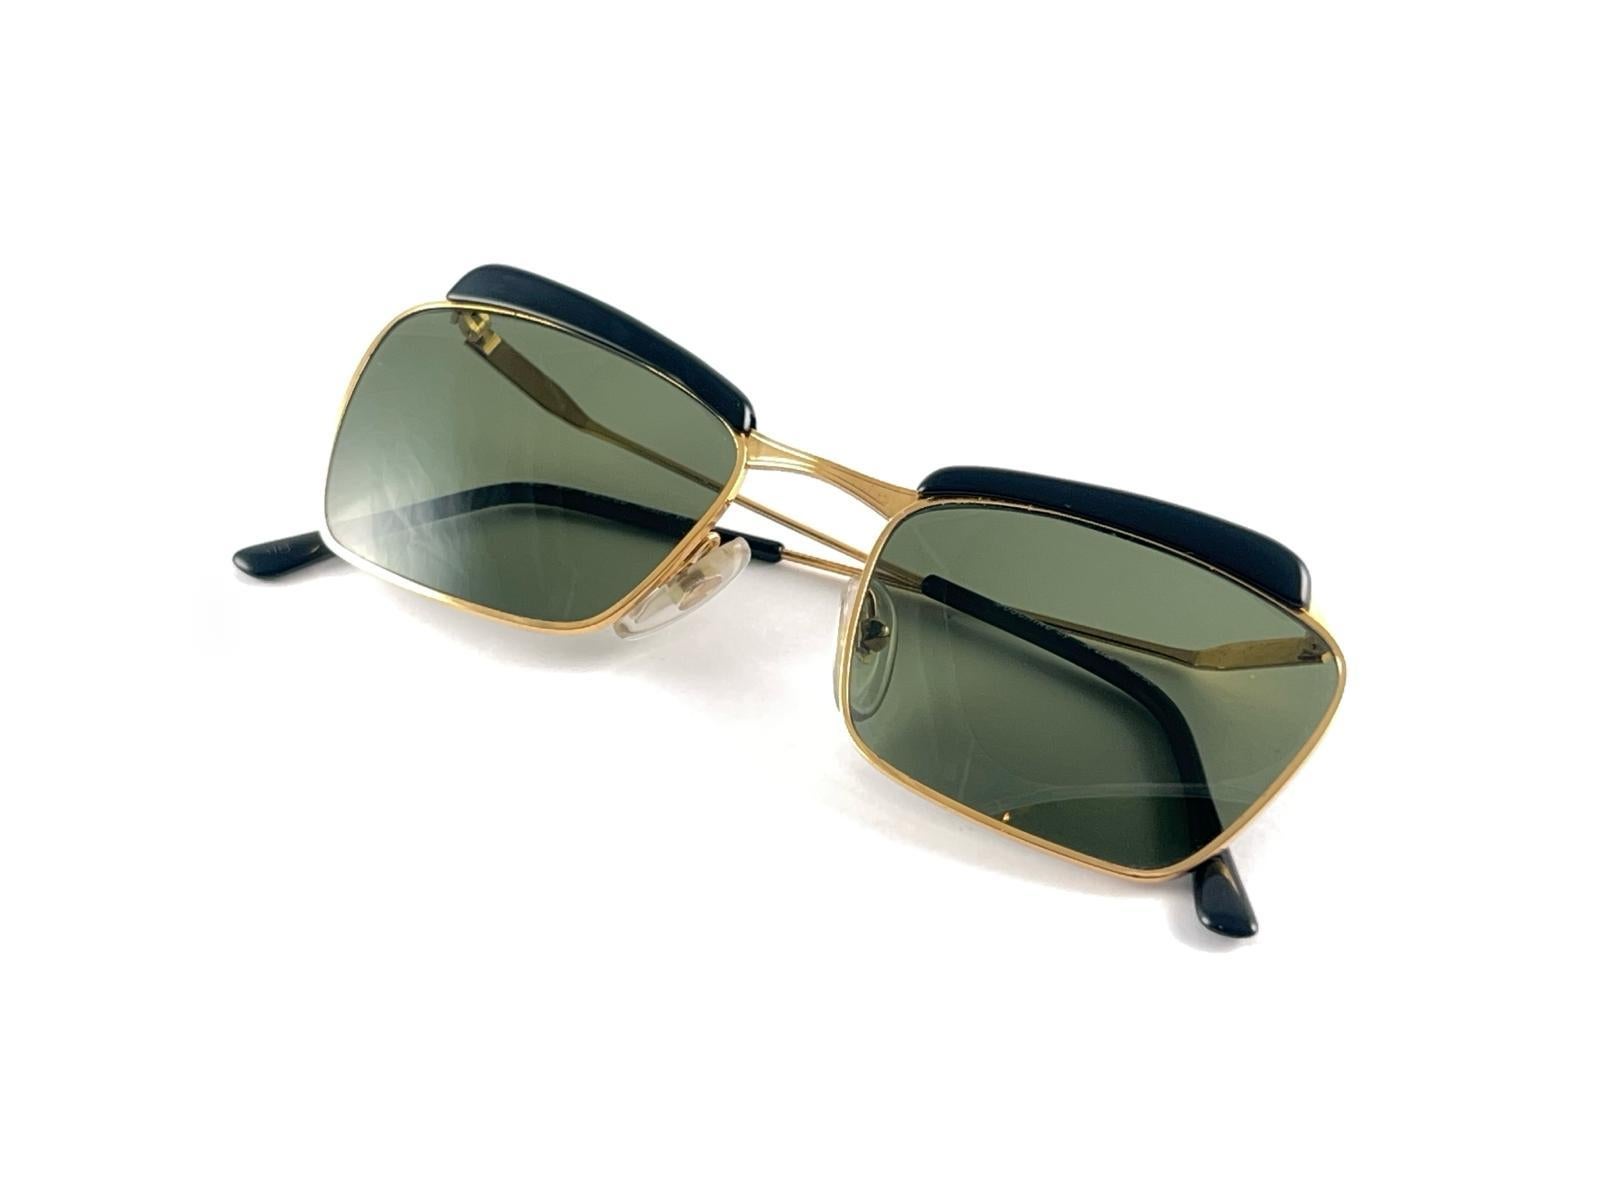 Vintage Moschino By Persol M260 Gold Frame Sunglasses 90'S Made in Italy For Sale 9